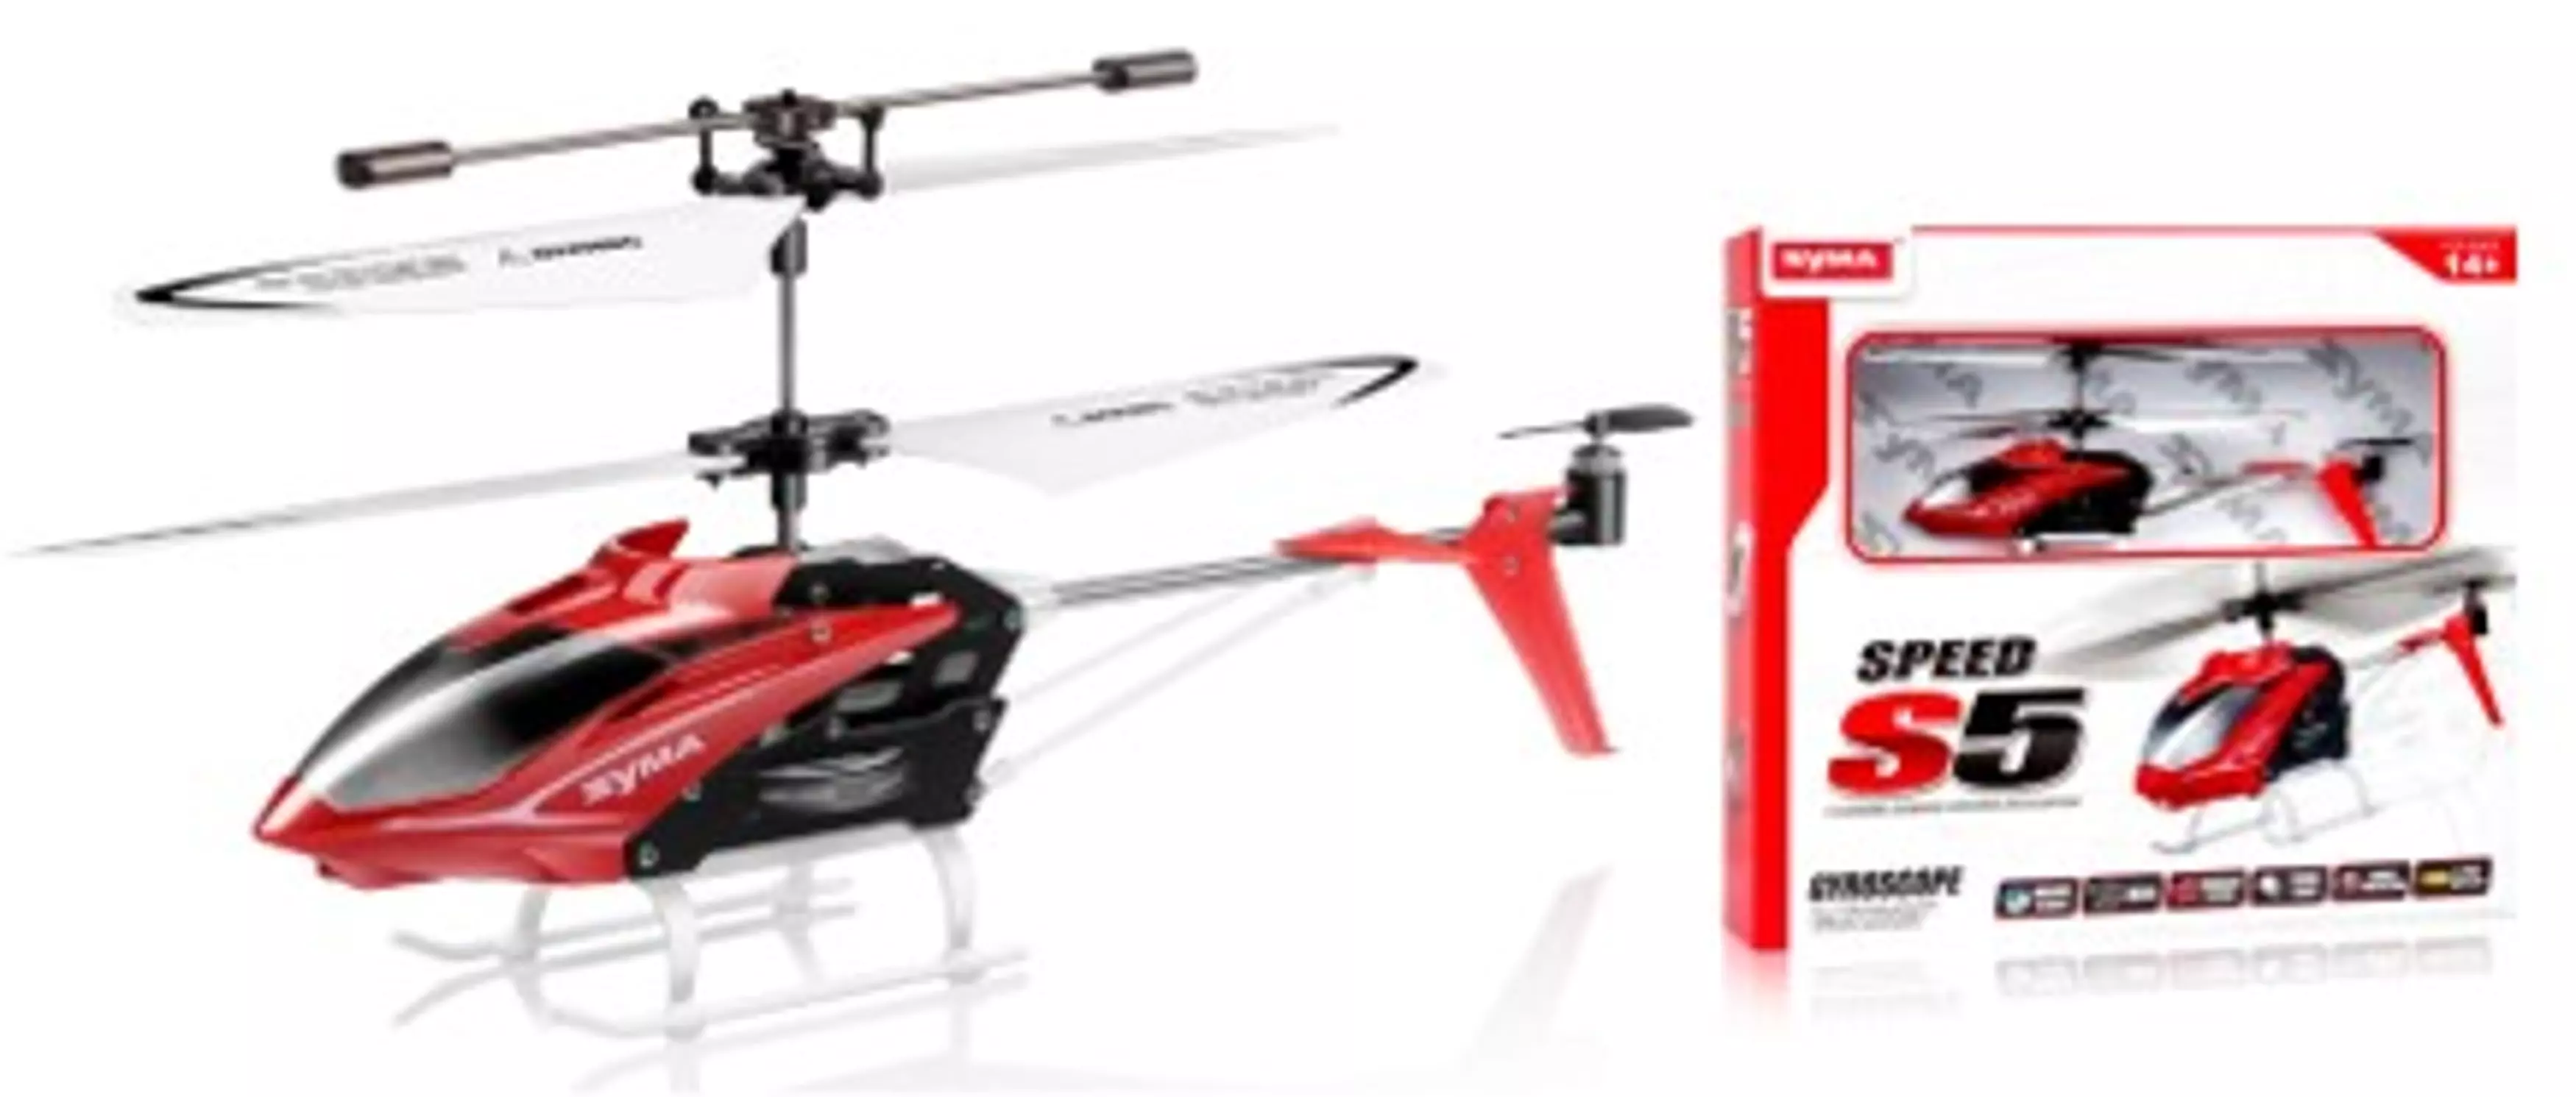 Syma I-R S5 Speed Helicopter Red